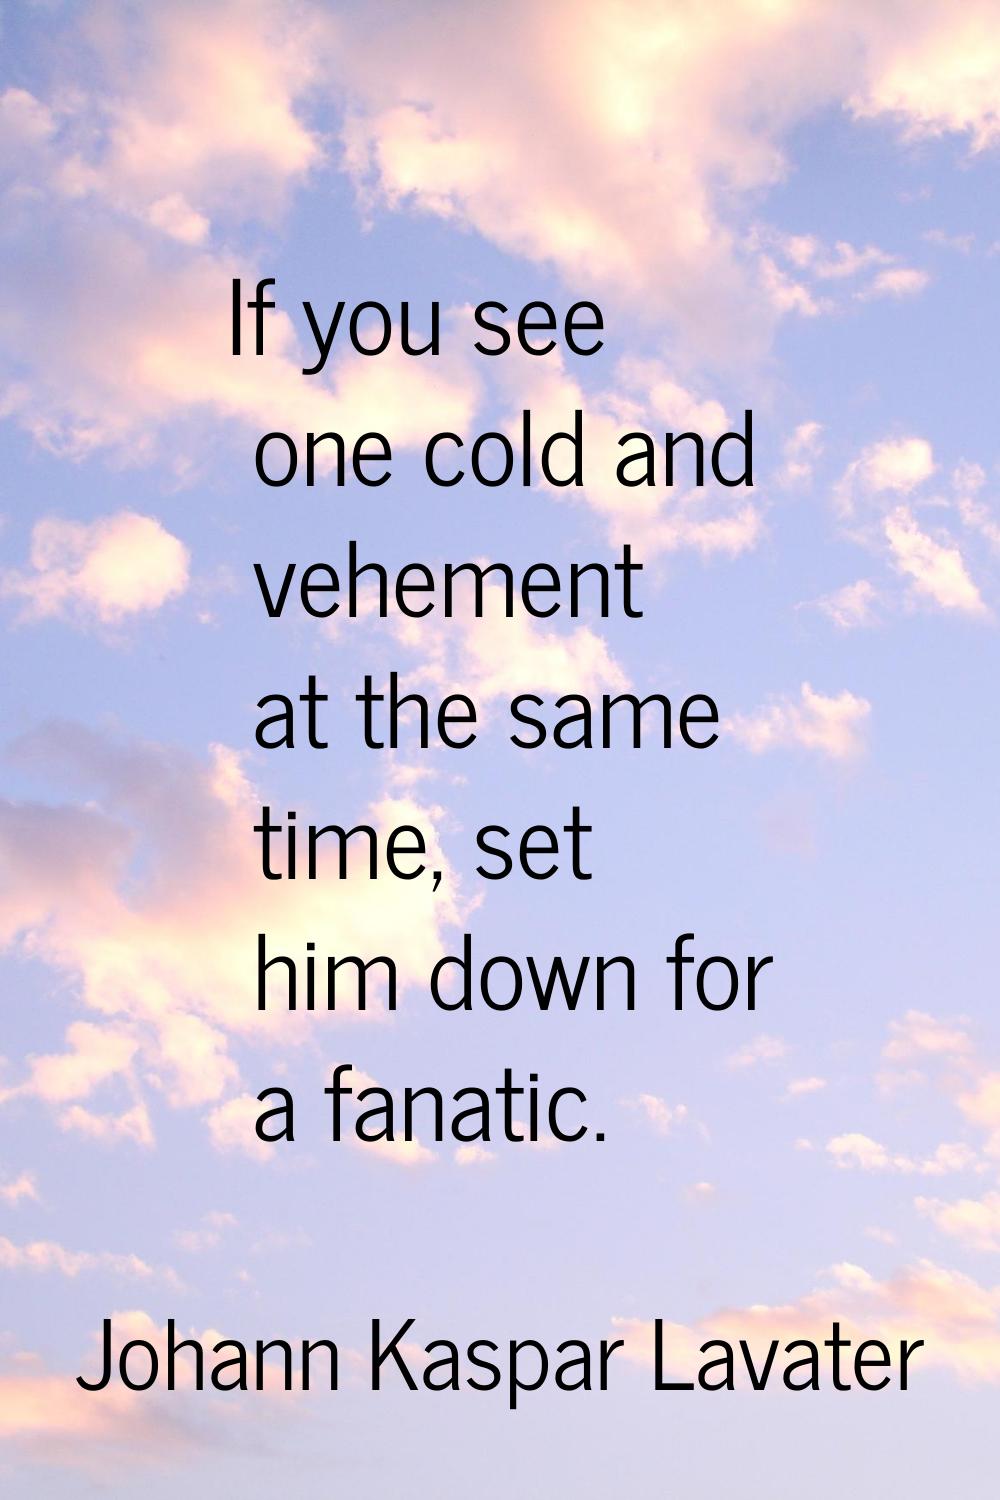 If you see one cold and vehement at the same time, set him down for a fanatic.